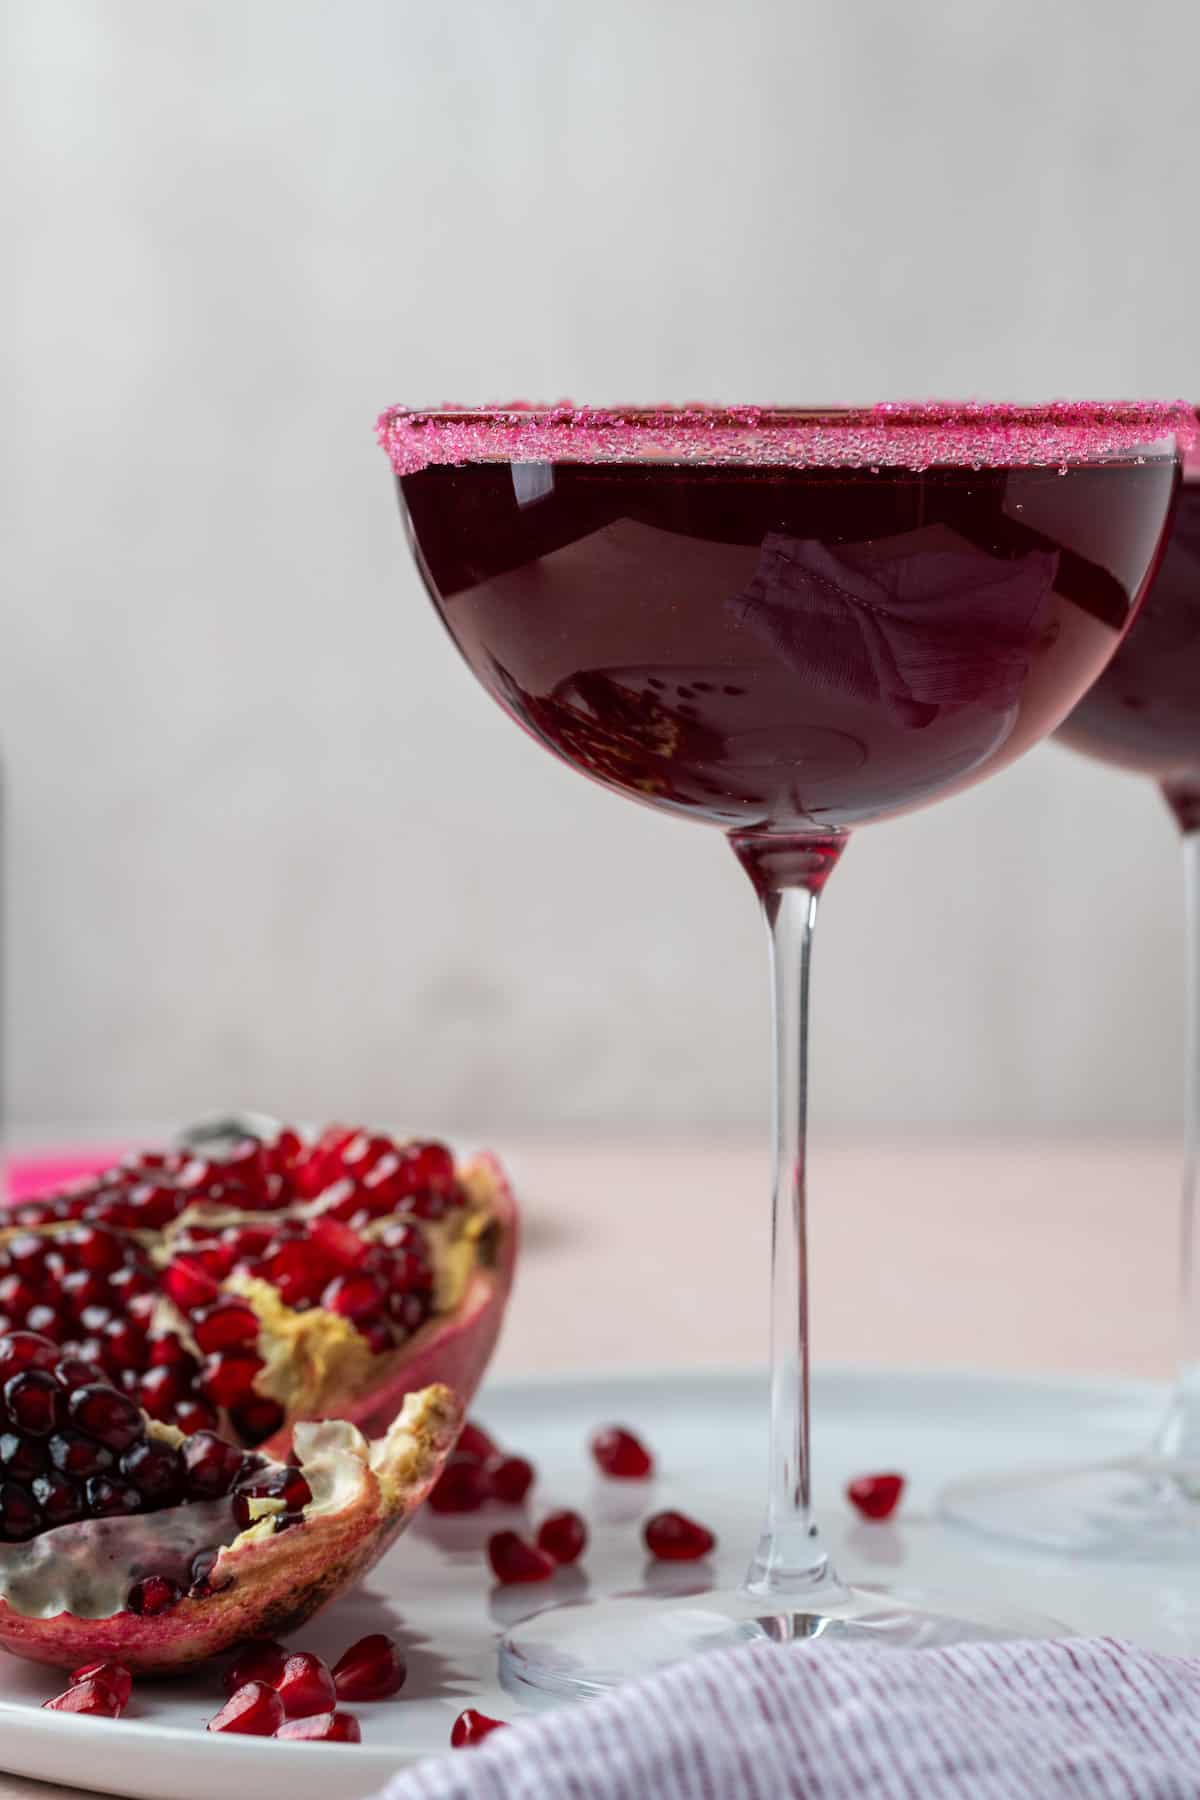 A tall coupe glass of pomegranate cocktail stands next to a cut open pomegranate that shows its seeds.